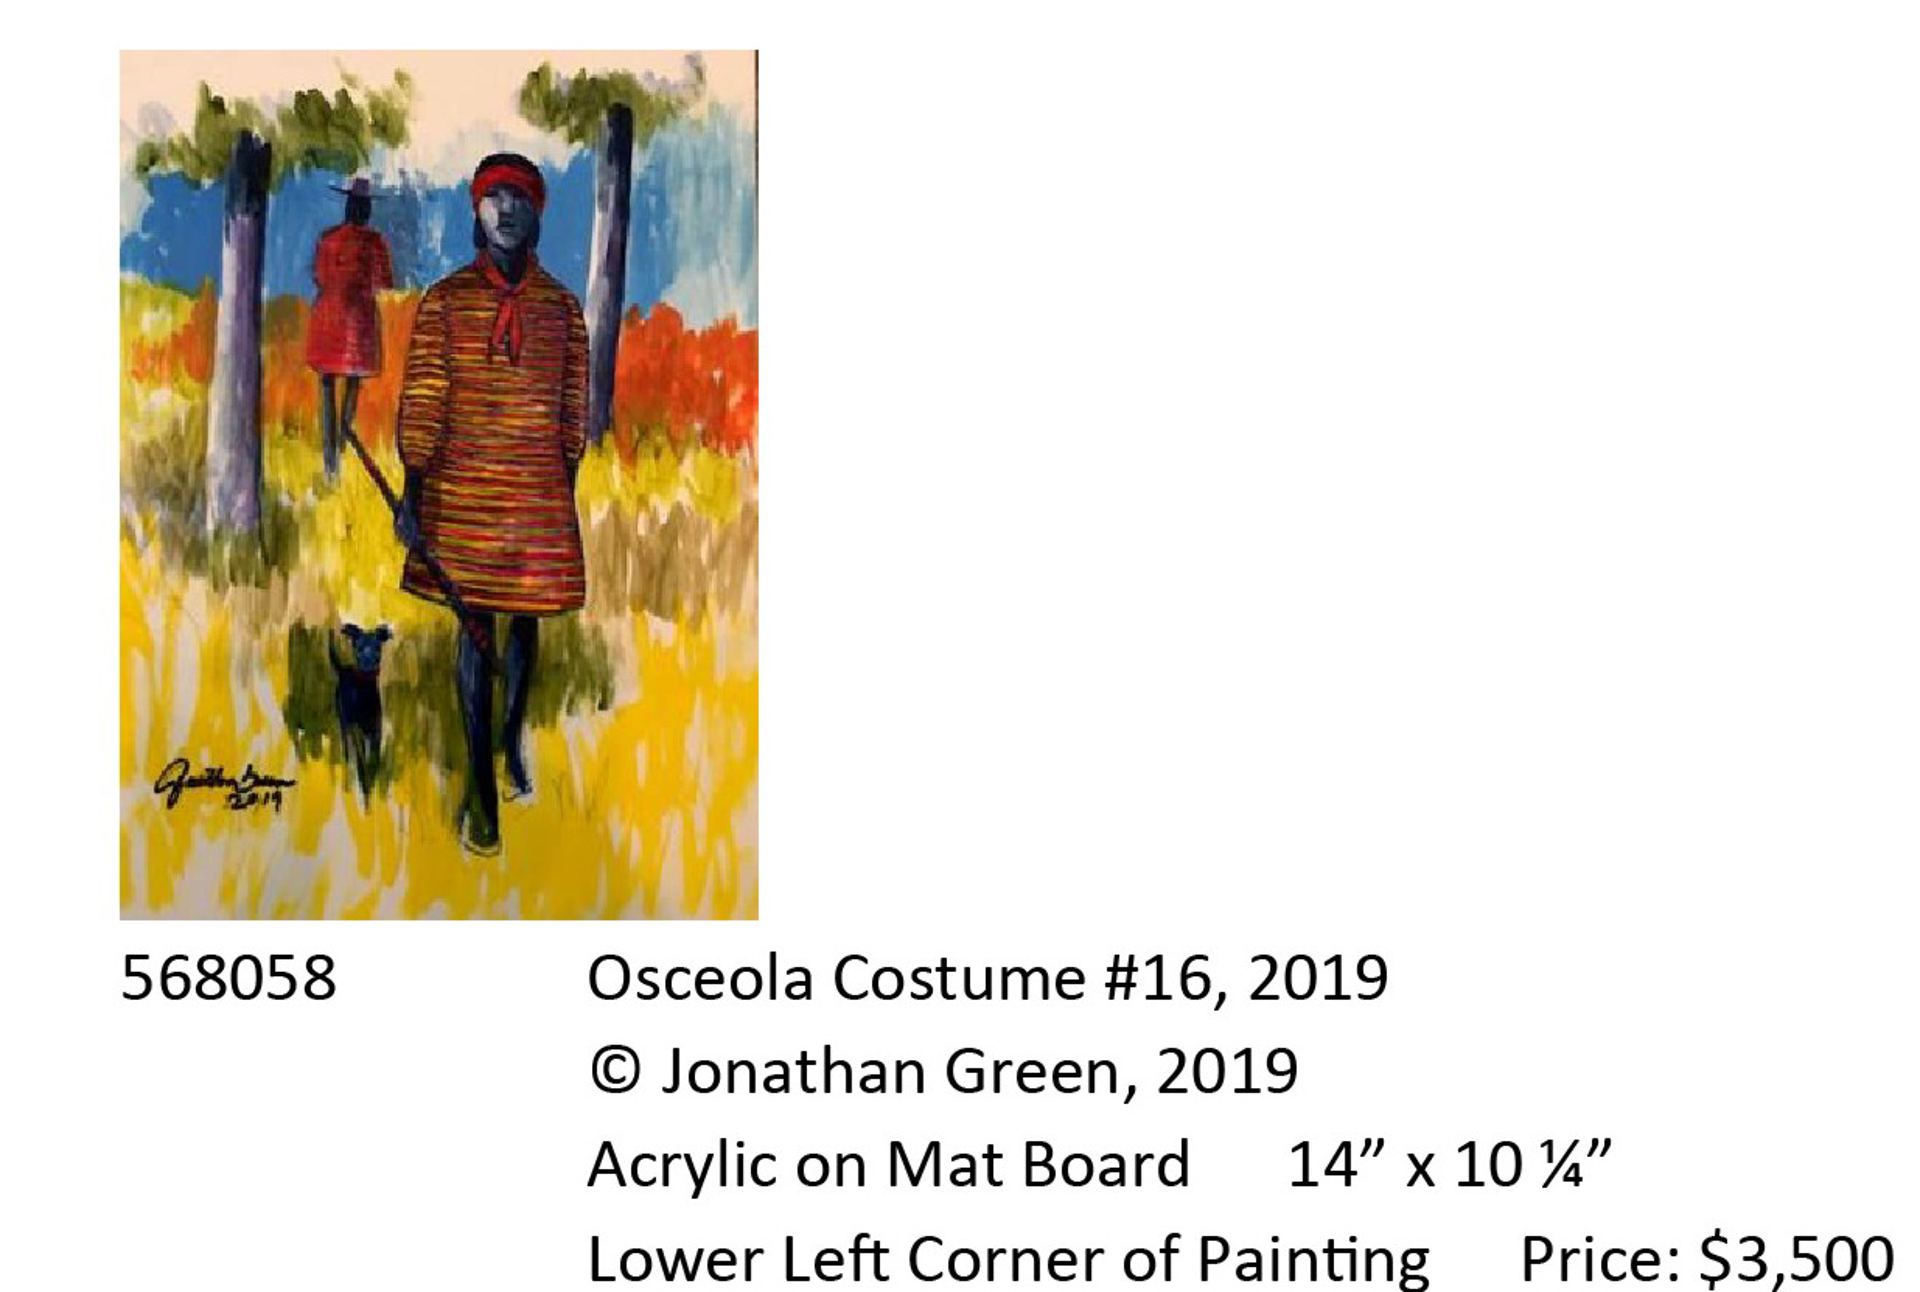 Osceola Costume #16 by Jonathan Green - Pop-Up Event